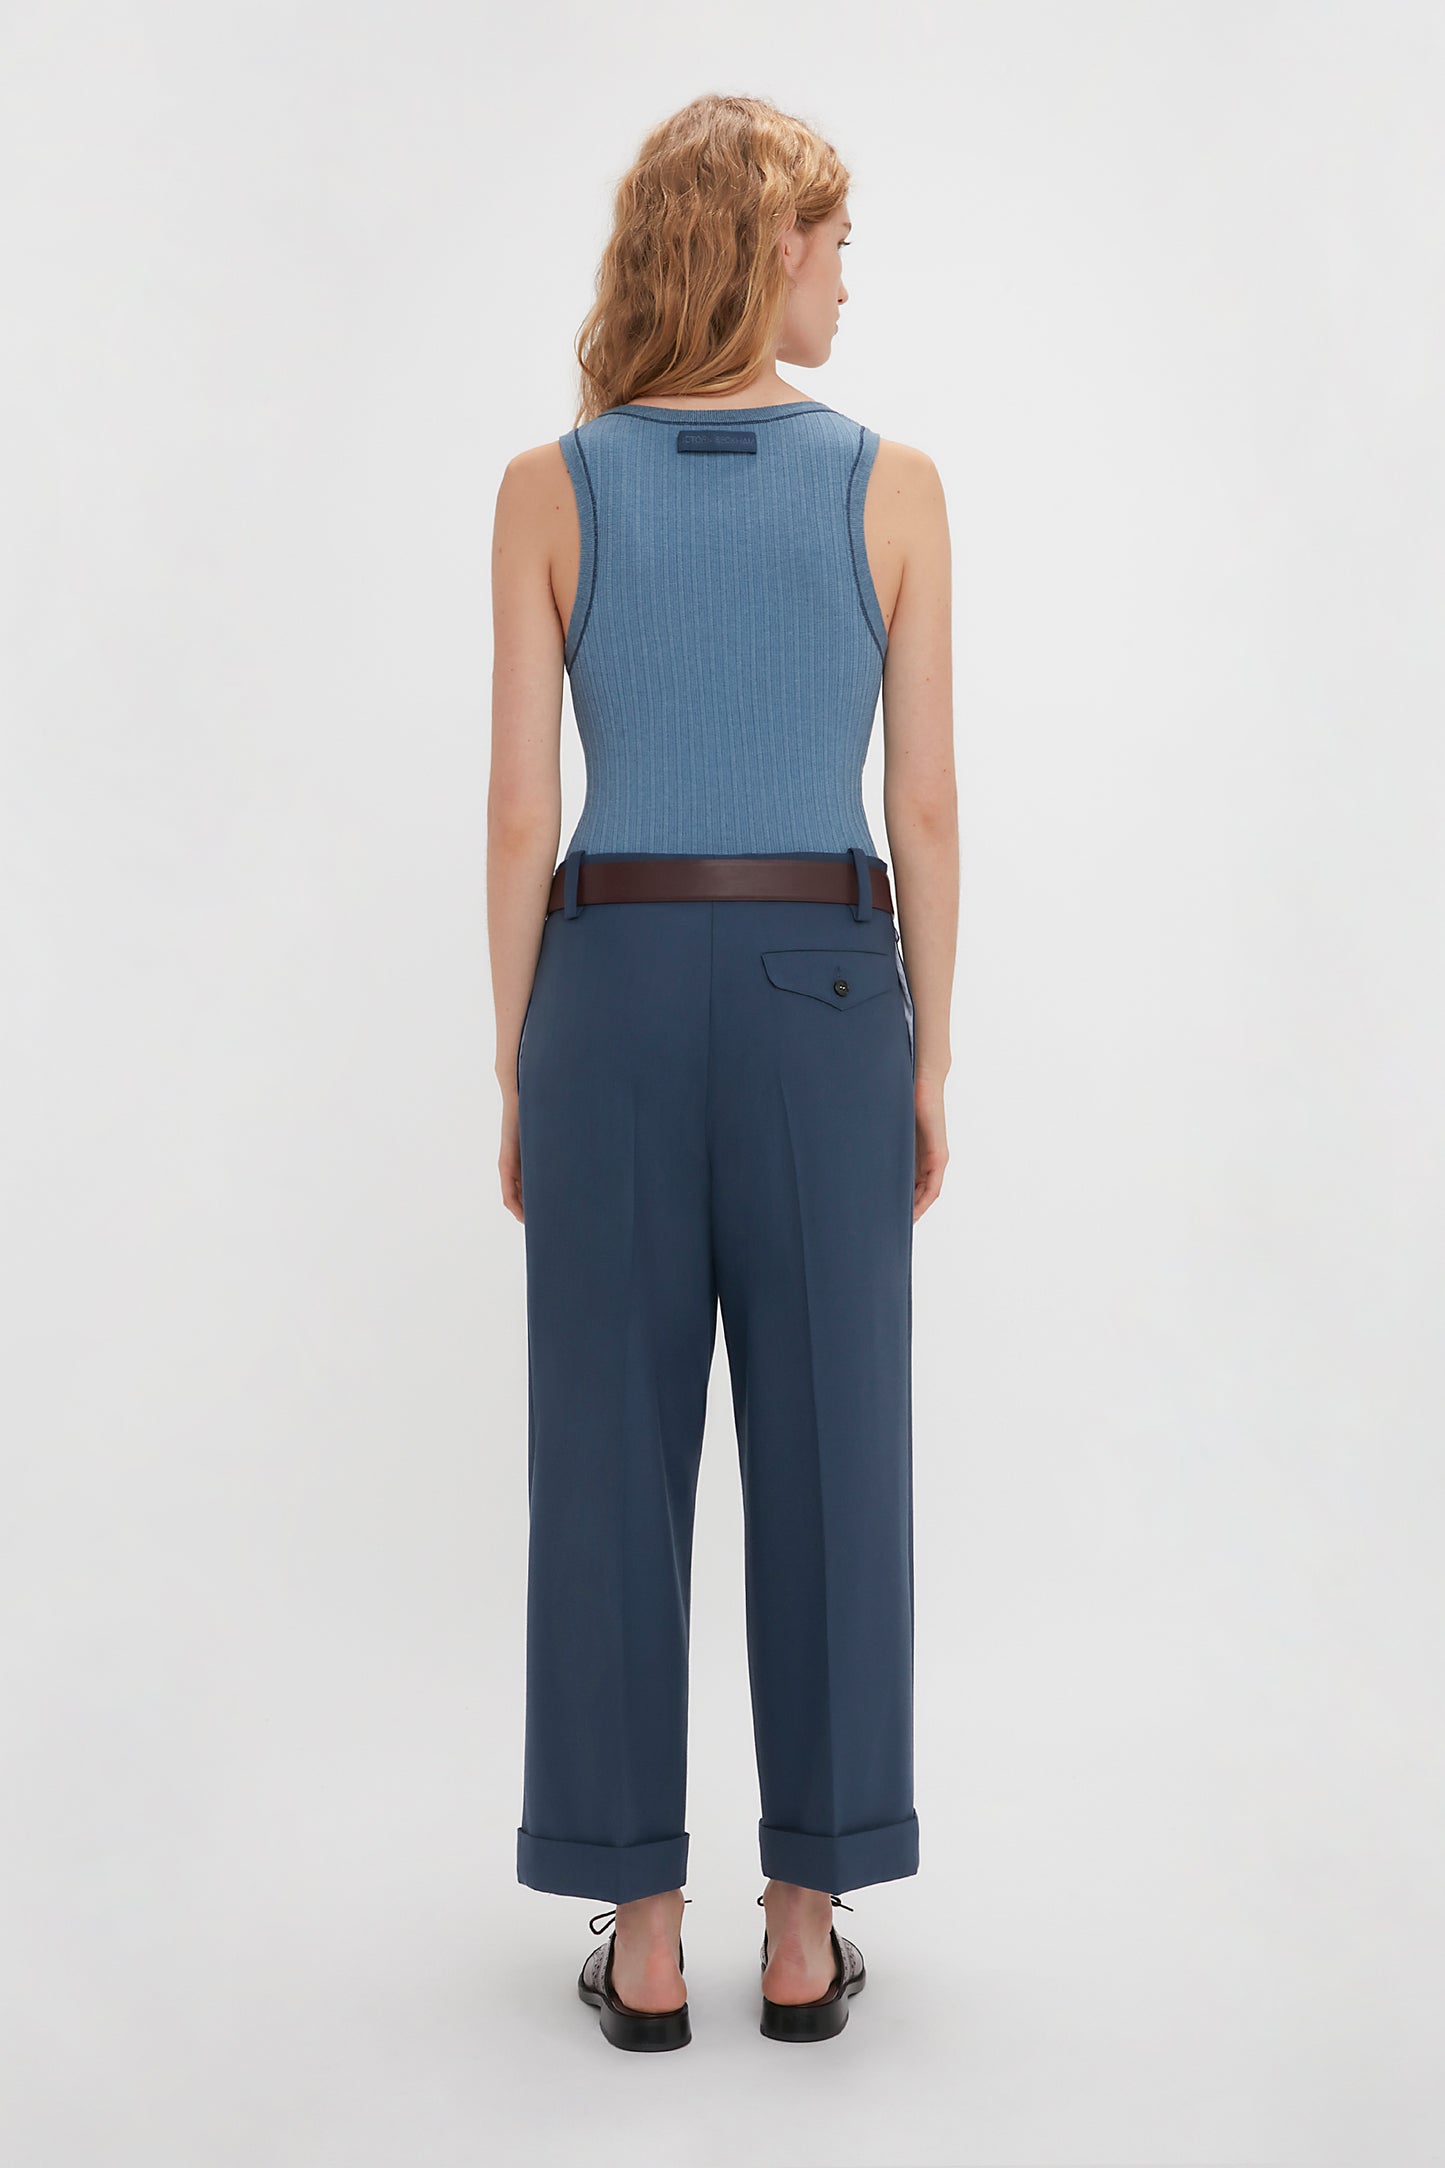 A woman stands facing away from the camera, wearing a blue fine knit tank and Victoria Beckham wide leg cropped trousers in heritage blue in a plain white studio setting.